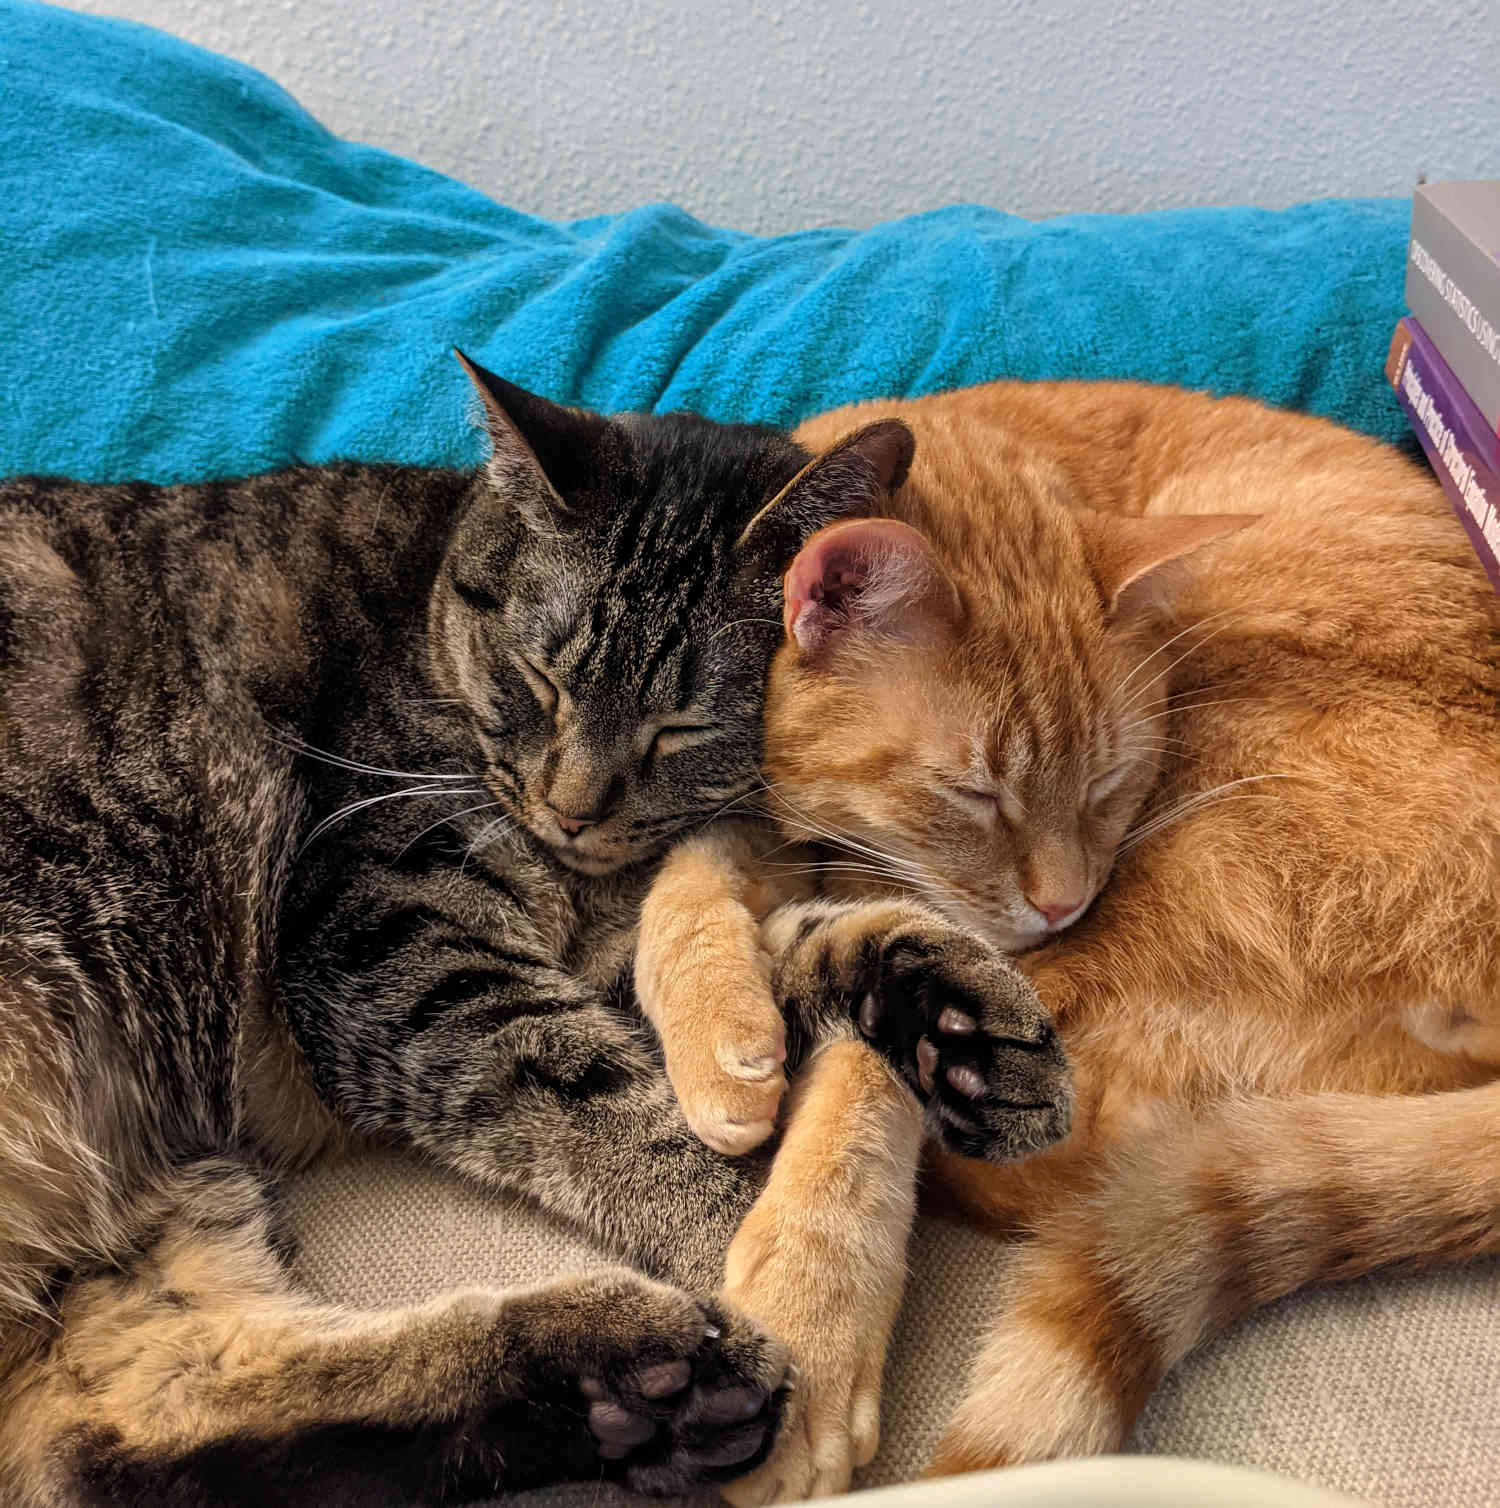 Two cats, orange and tabby, are sleeping in an embrace. Their front legs are interlaced, and their heads side-by-side.